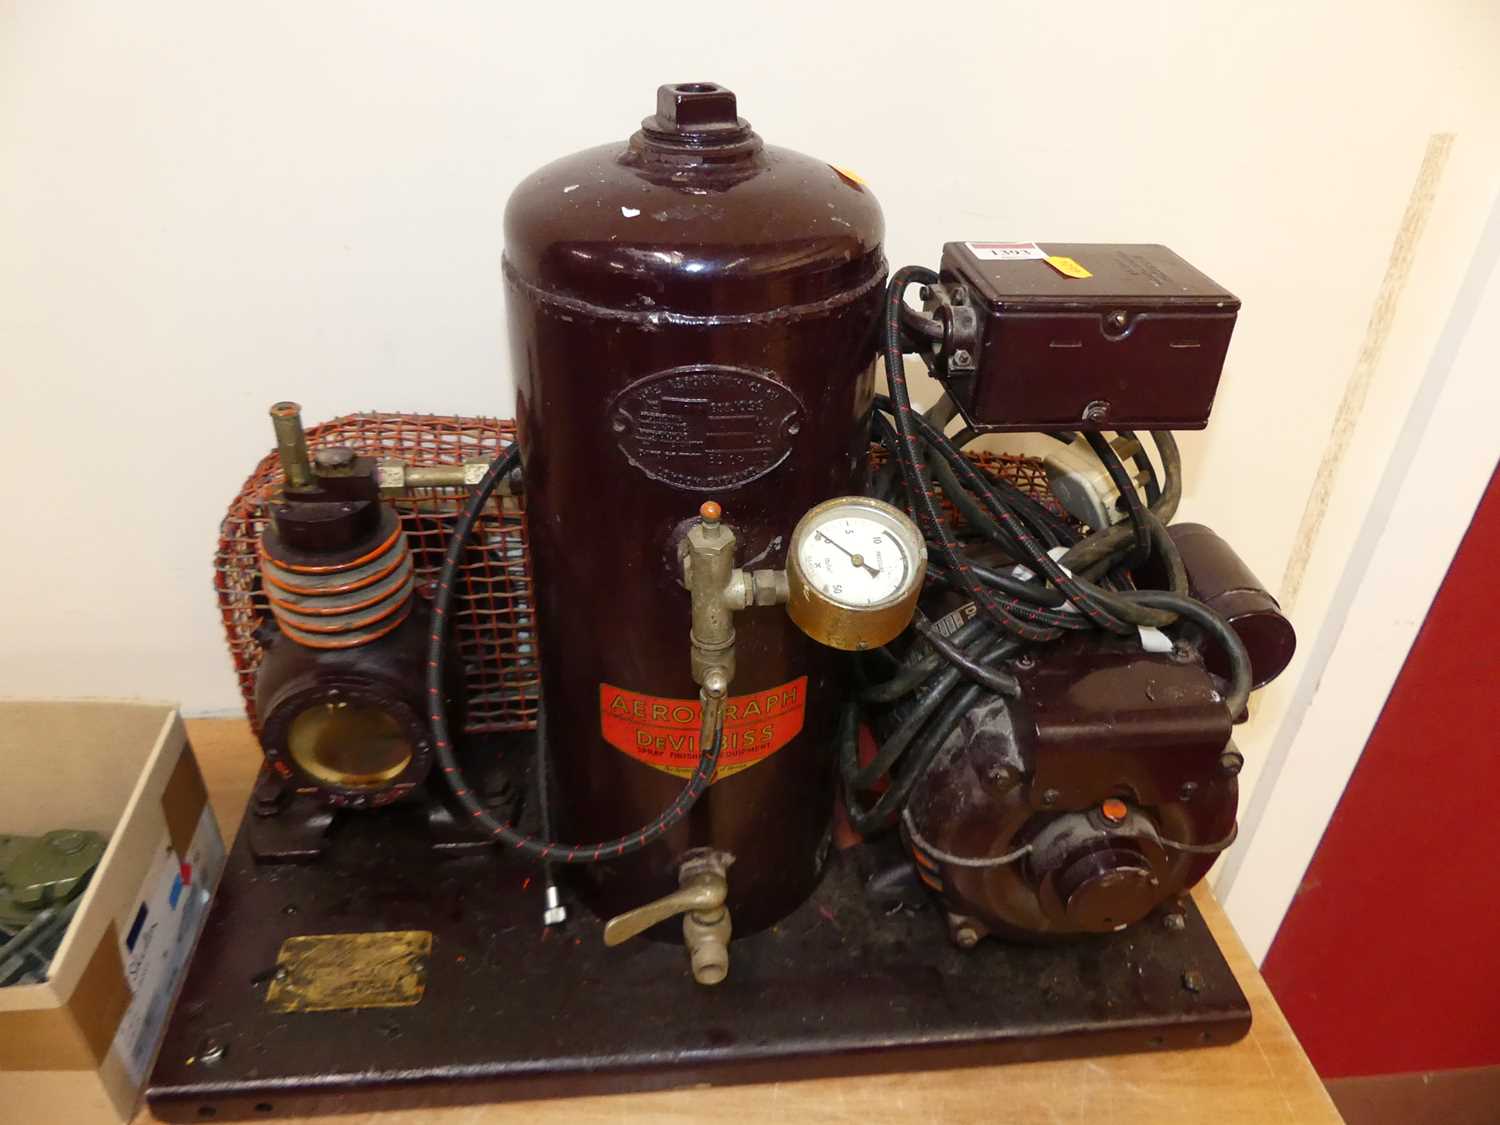 An Aerograph Devilbiss spray finishing equipment, boxed compressor and engine system